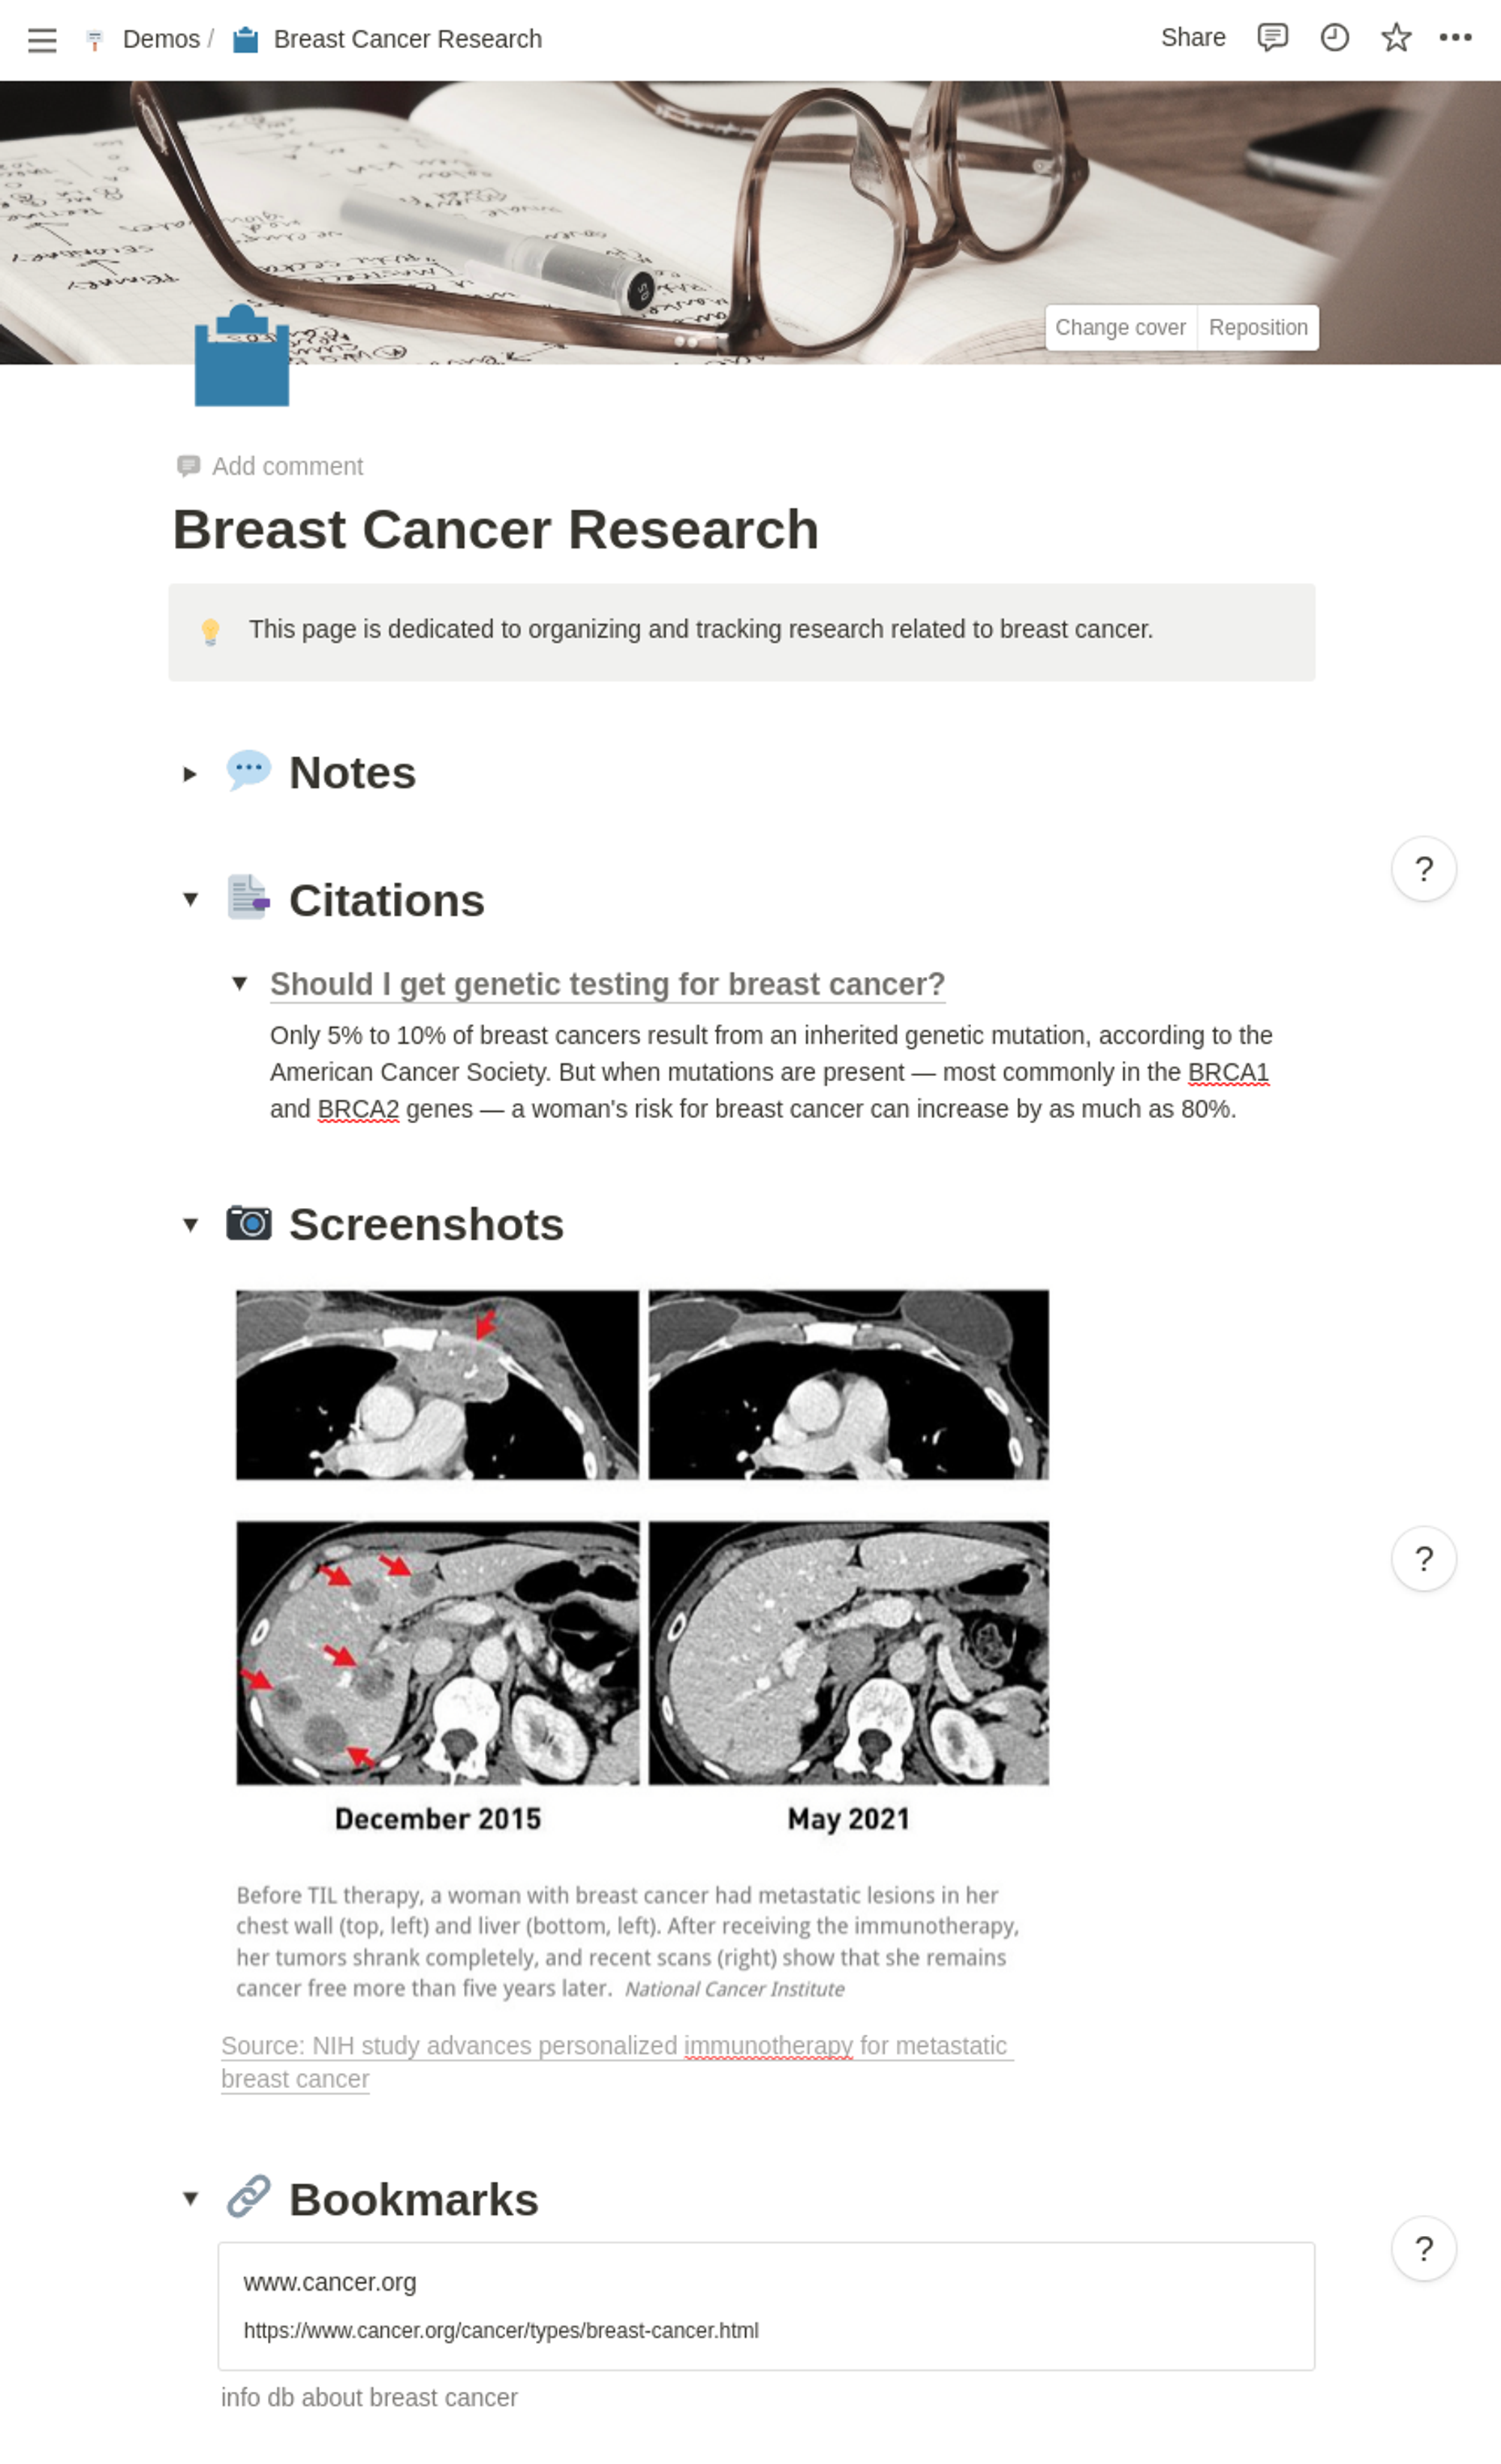 Capture of “Breast Cancer Research”  Notion page example